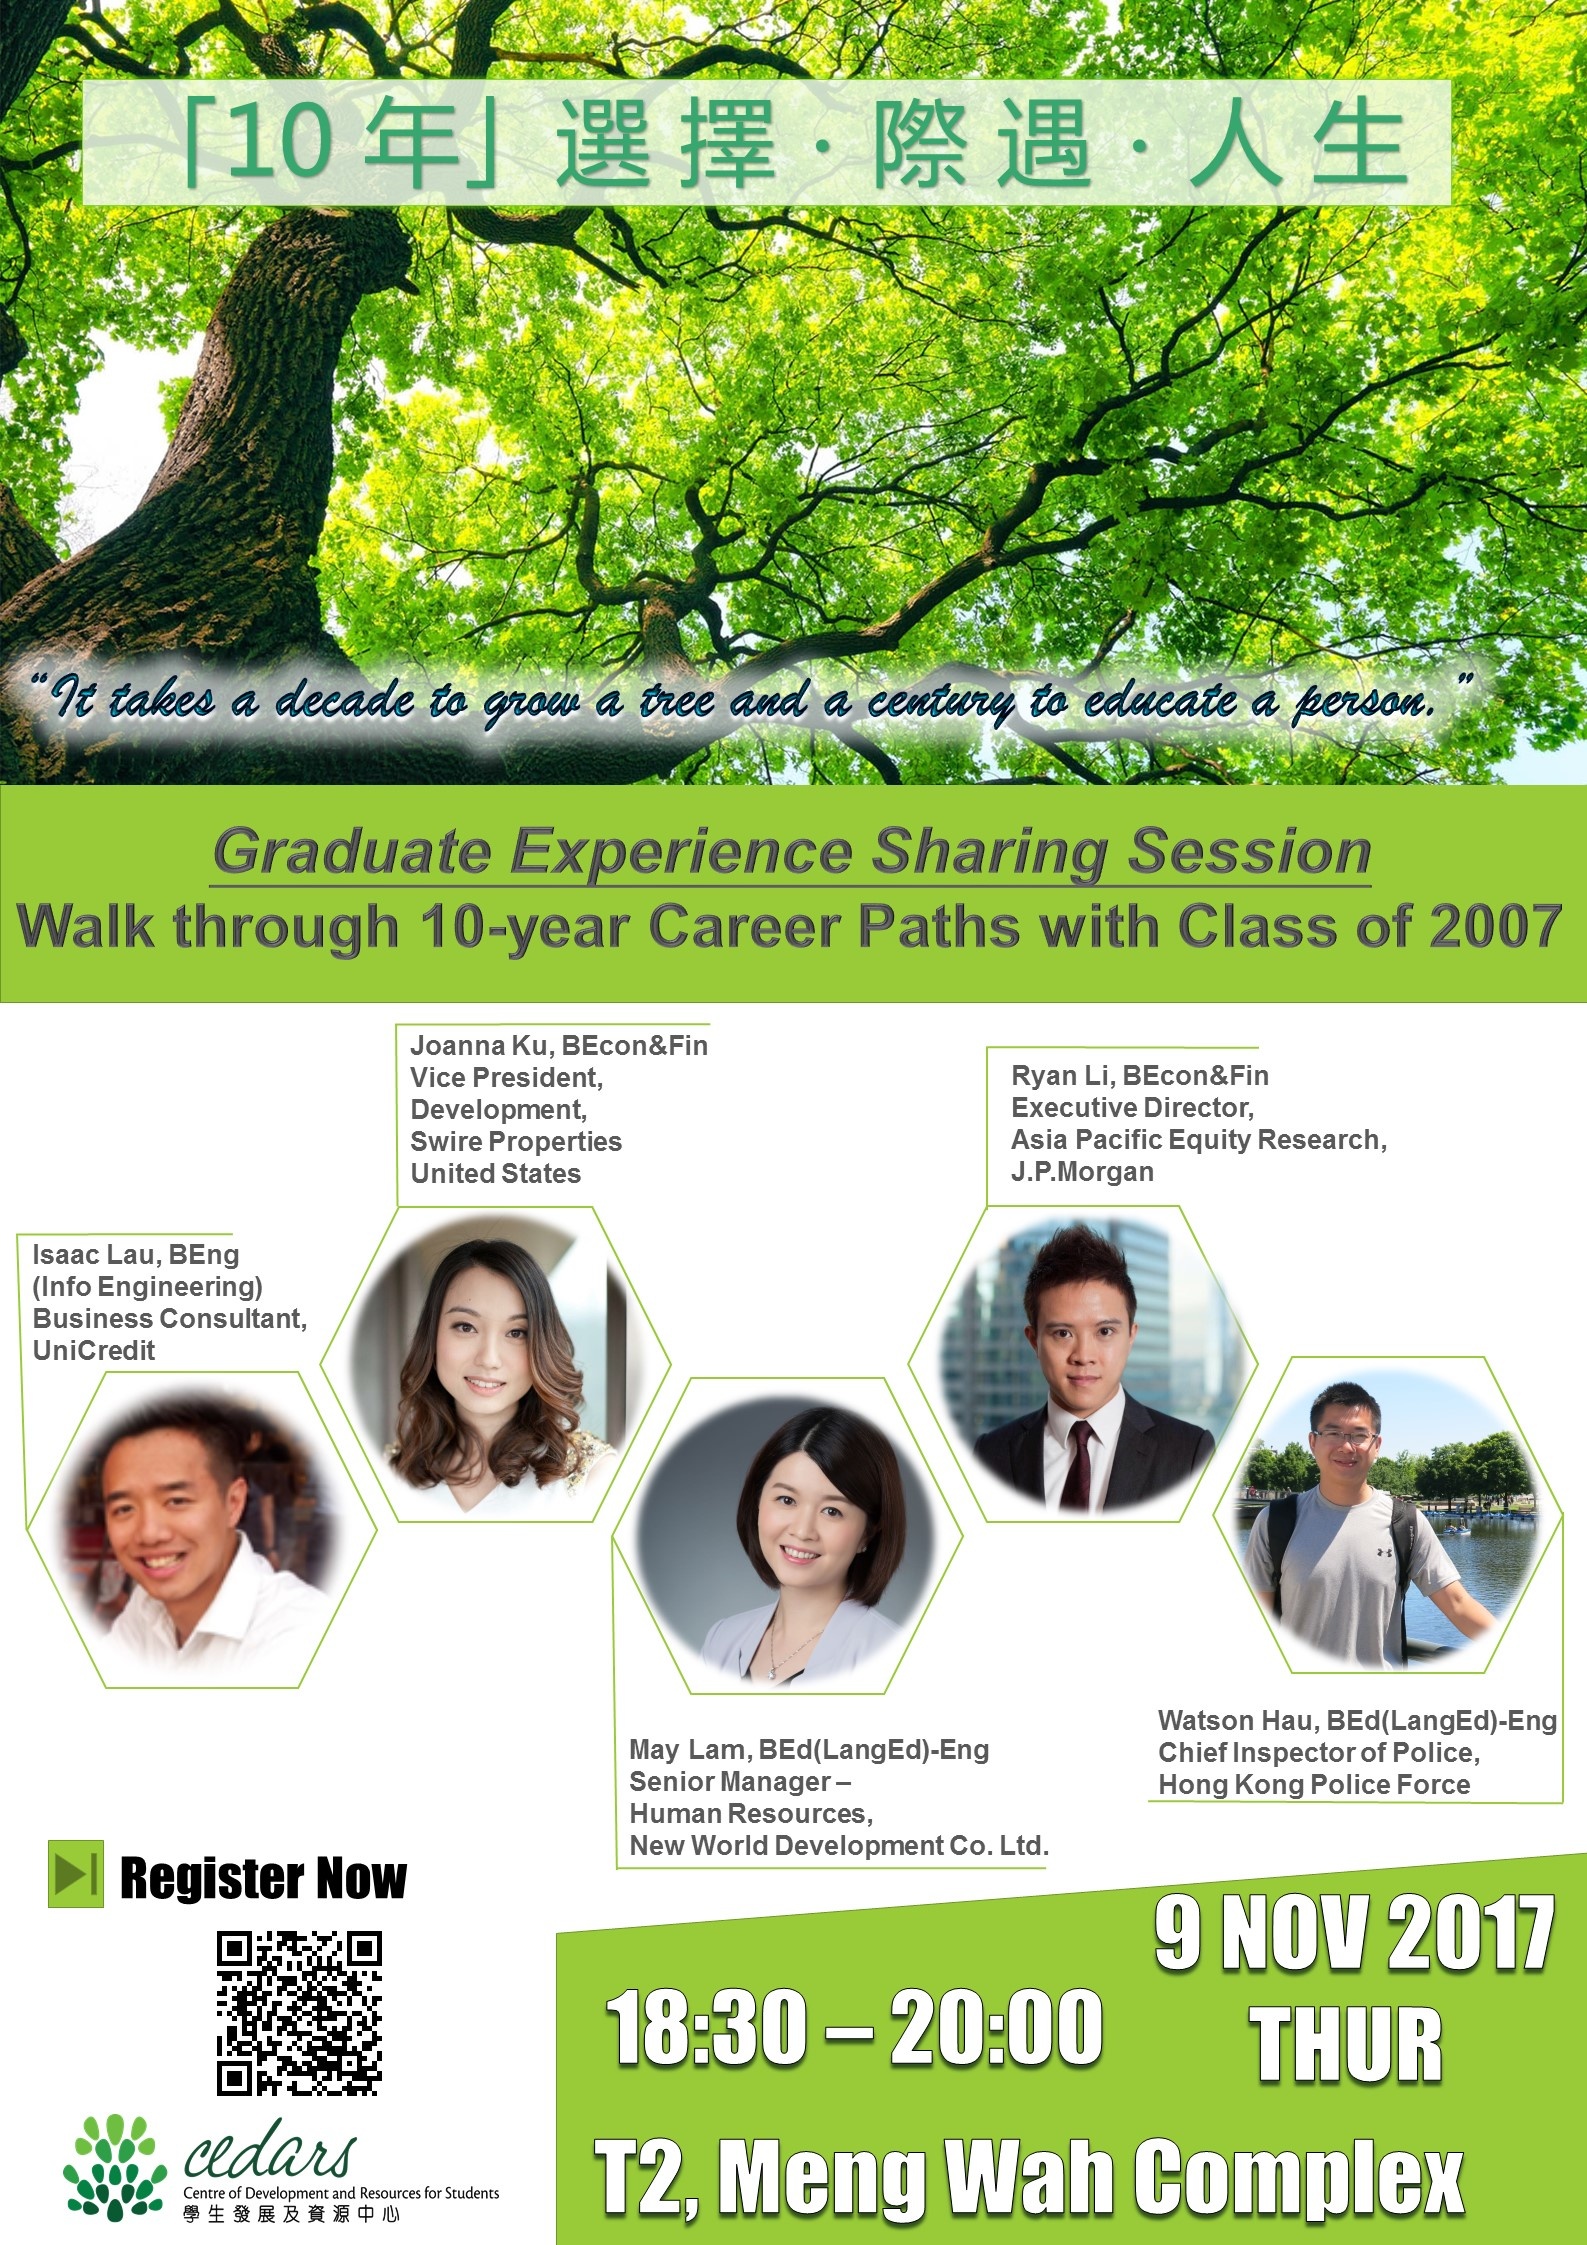 Graduate Experience Sharing Session: Walk through 10- year Career Paths with Class of 2007